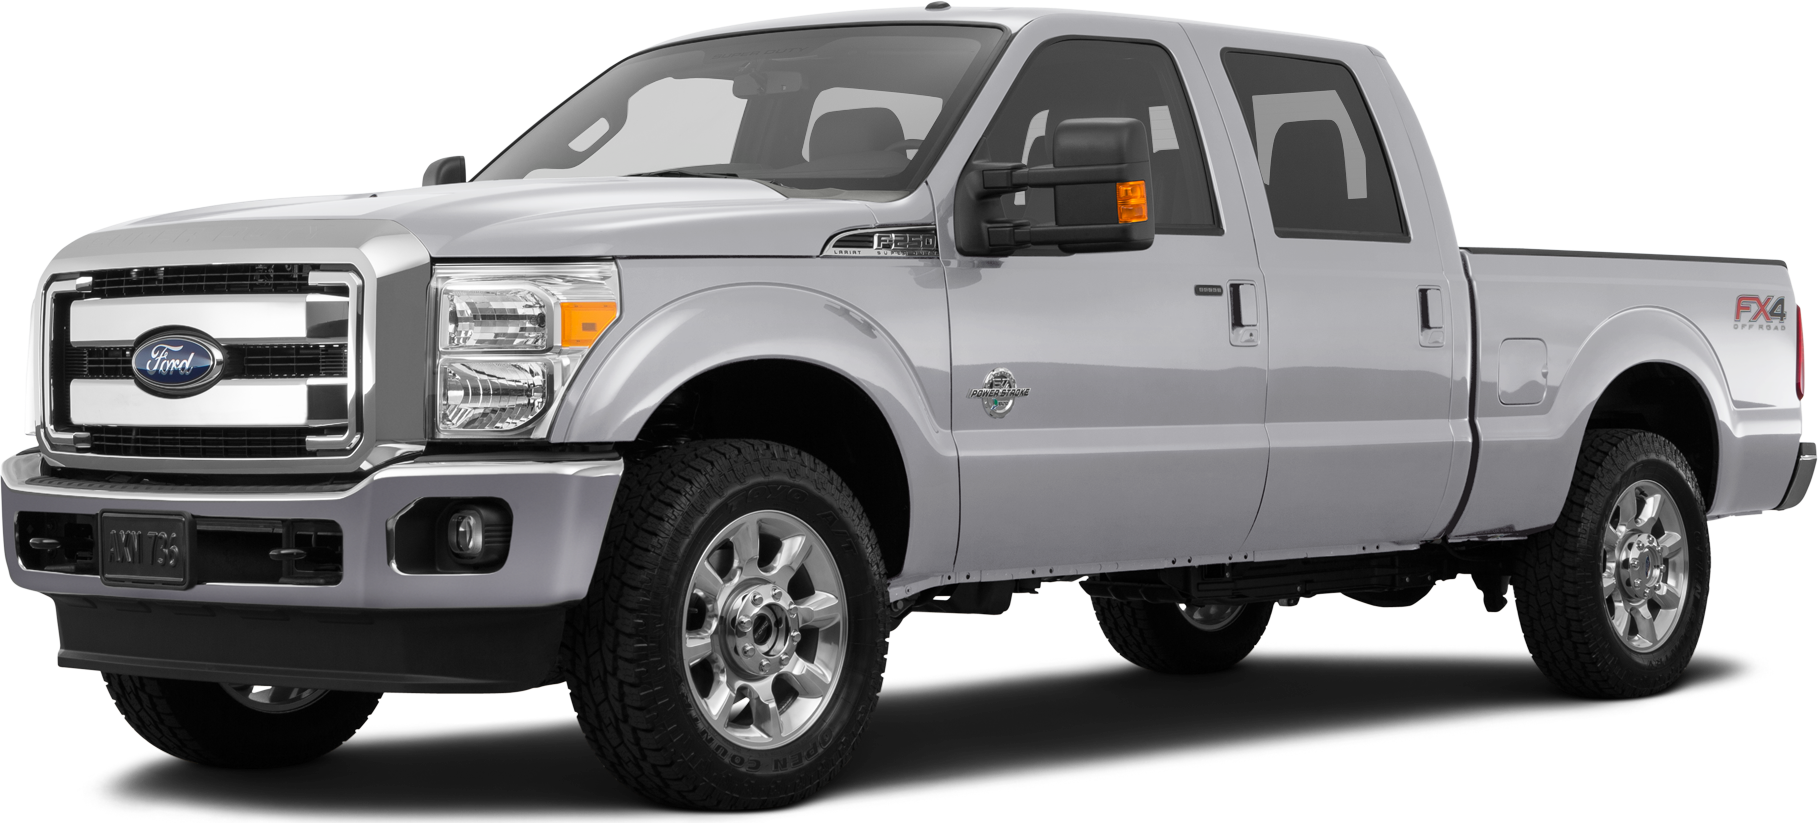 2016 Ford F250 Super Duty Crew Cab Specs and Features | Kelley